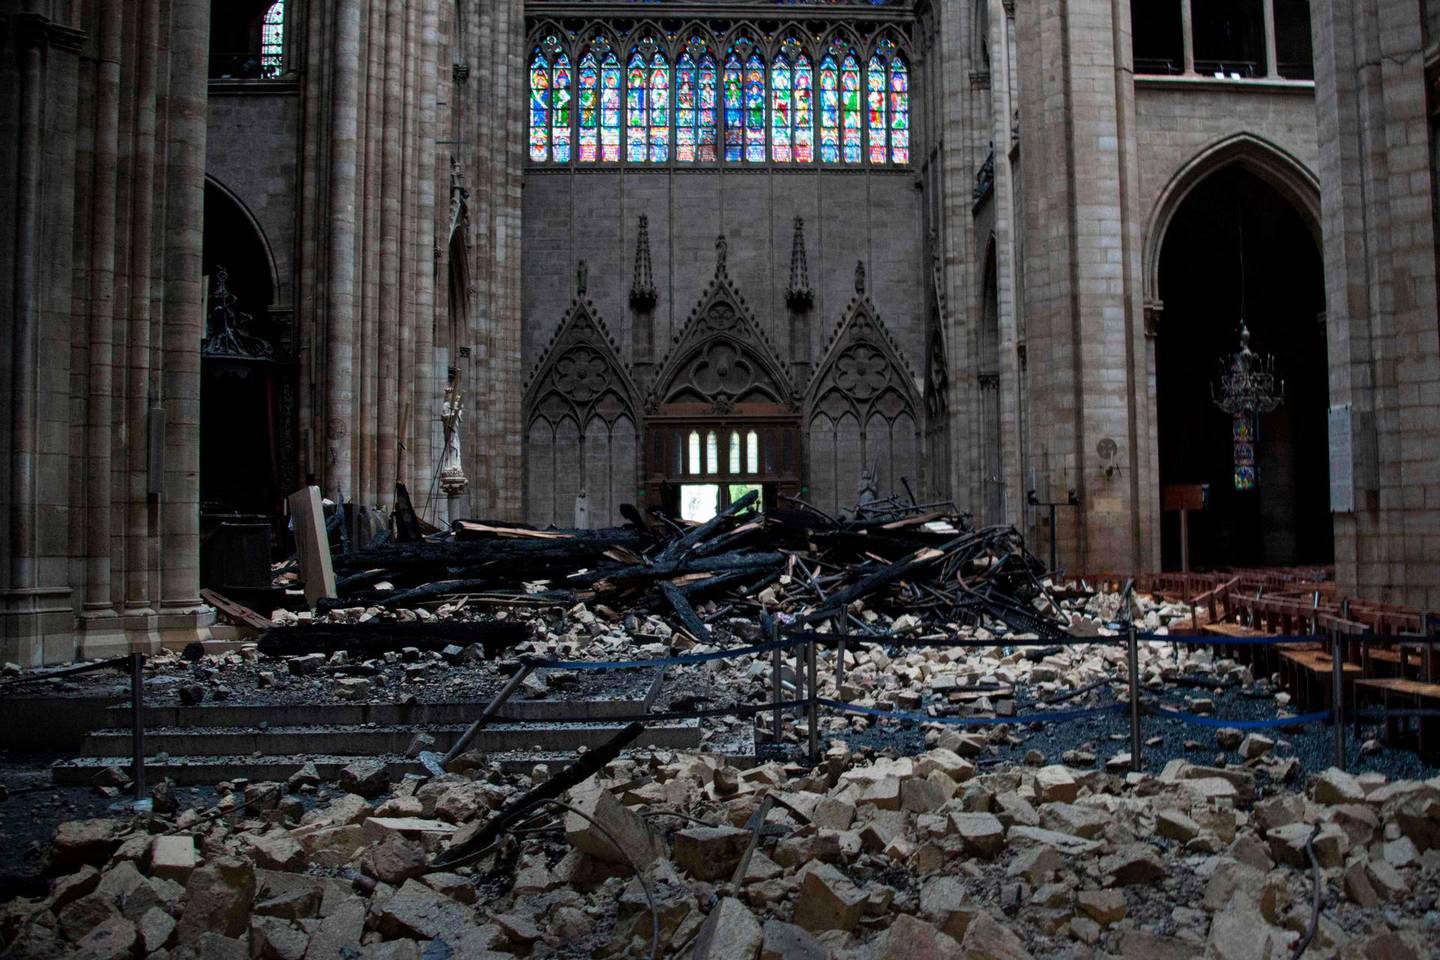 This general view shows debris inside the Notre-Dame-de Paris Cathedral in Paris on April 16, 2019, a day after a fire that devastated the building in the centre of the French capital.  French President Emmanuel Macron vowed on April 16 to rebuild Notre-Dame cathedral "within five years", after a fire which caused major damage to the 850-year-old Paris landmark. / AFP / Amaury BLIN
